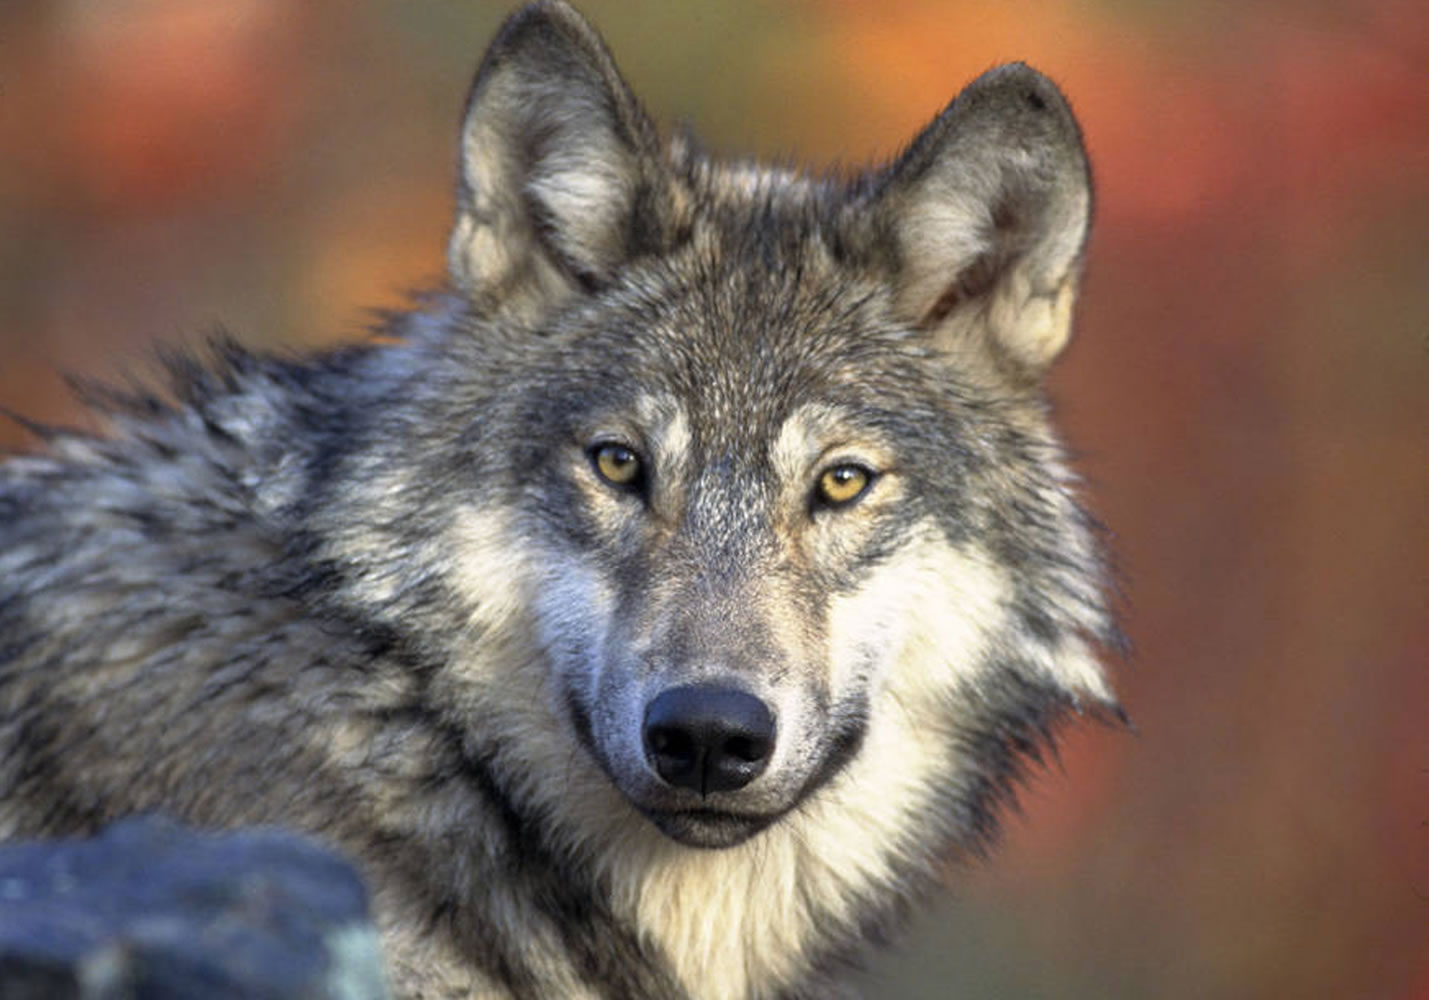 A scientific review says the U.S. government's bid to lift federal protections for gray wolves across most of the Lower 48 states is based on unproven claims about their genetics. The U.S. Fish and Wildlife Service peer review panel released its report Friday.